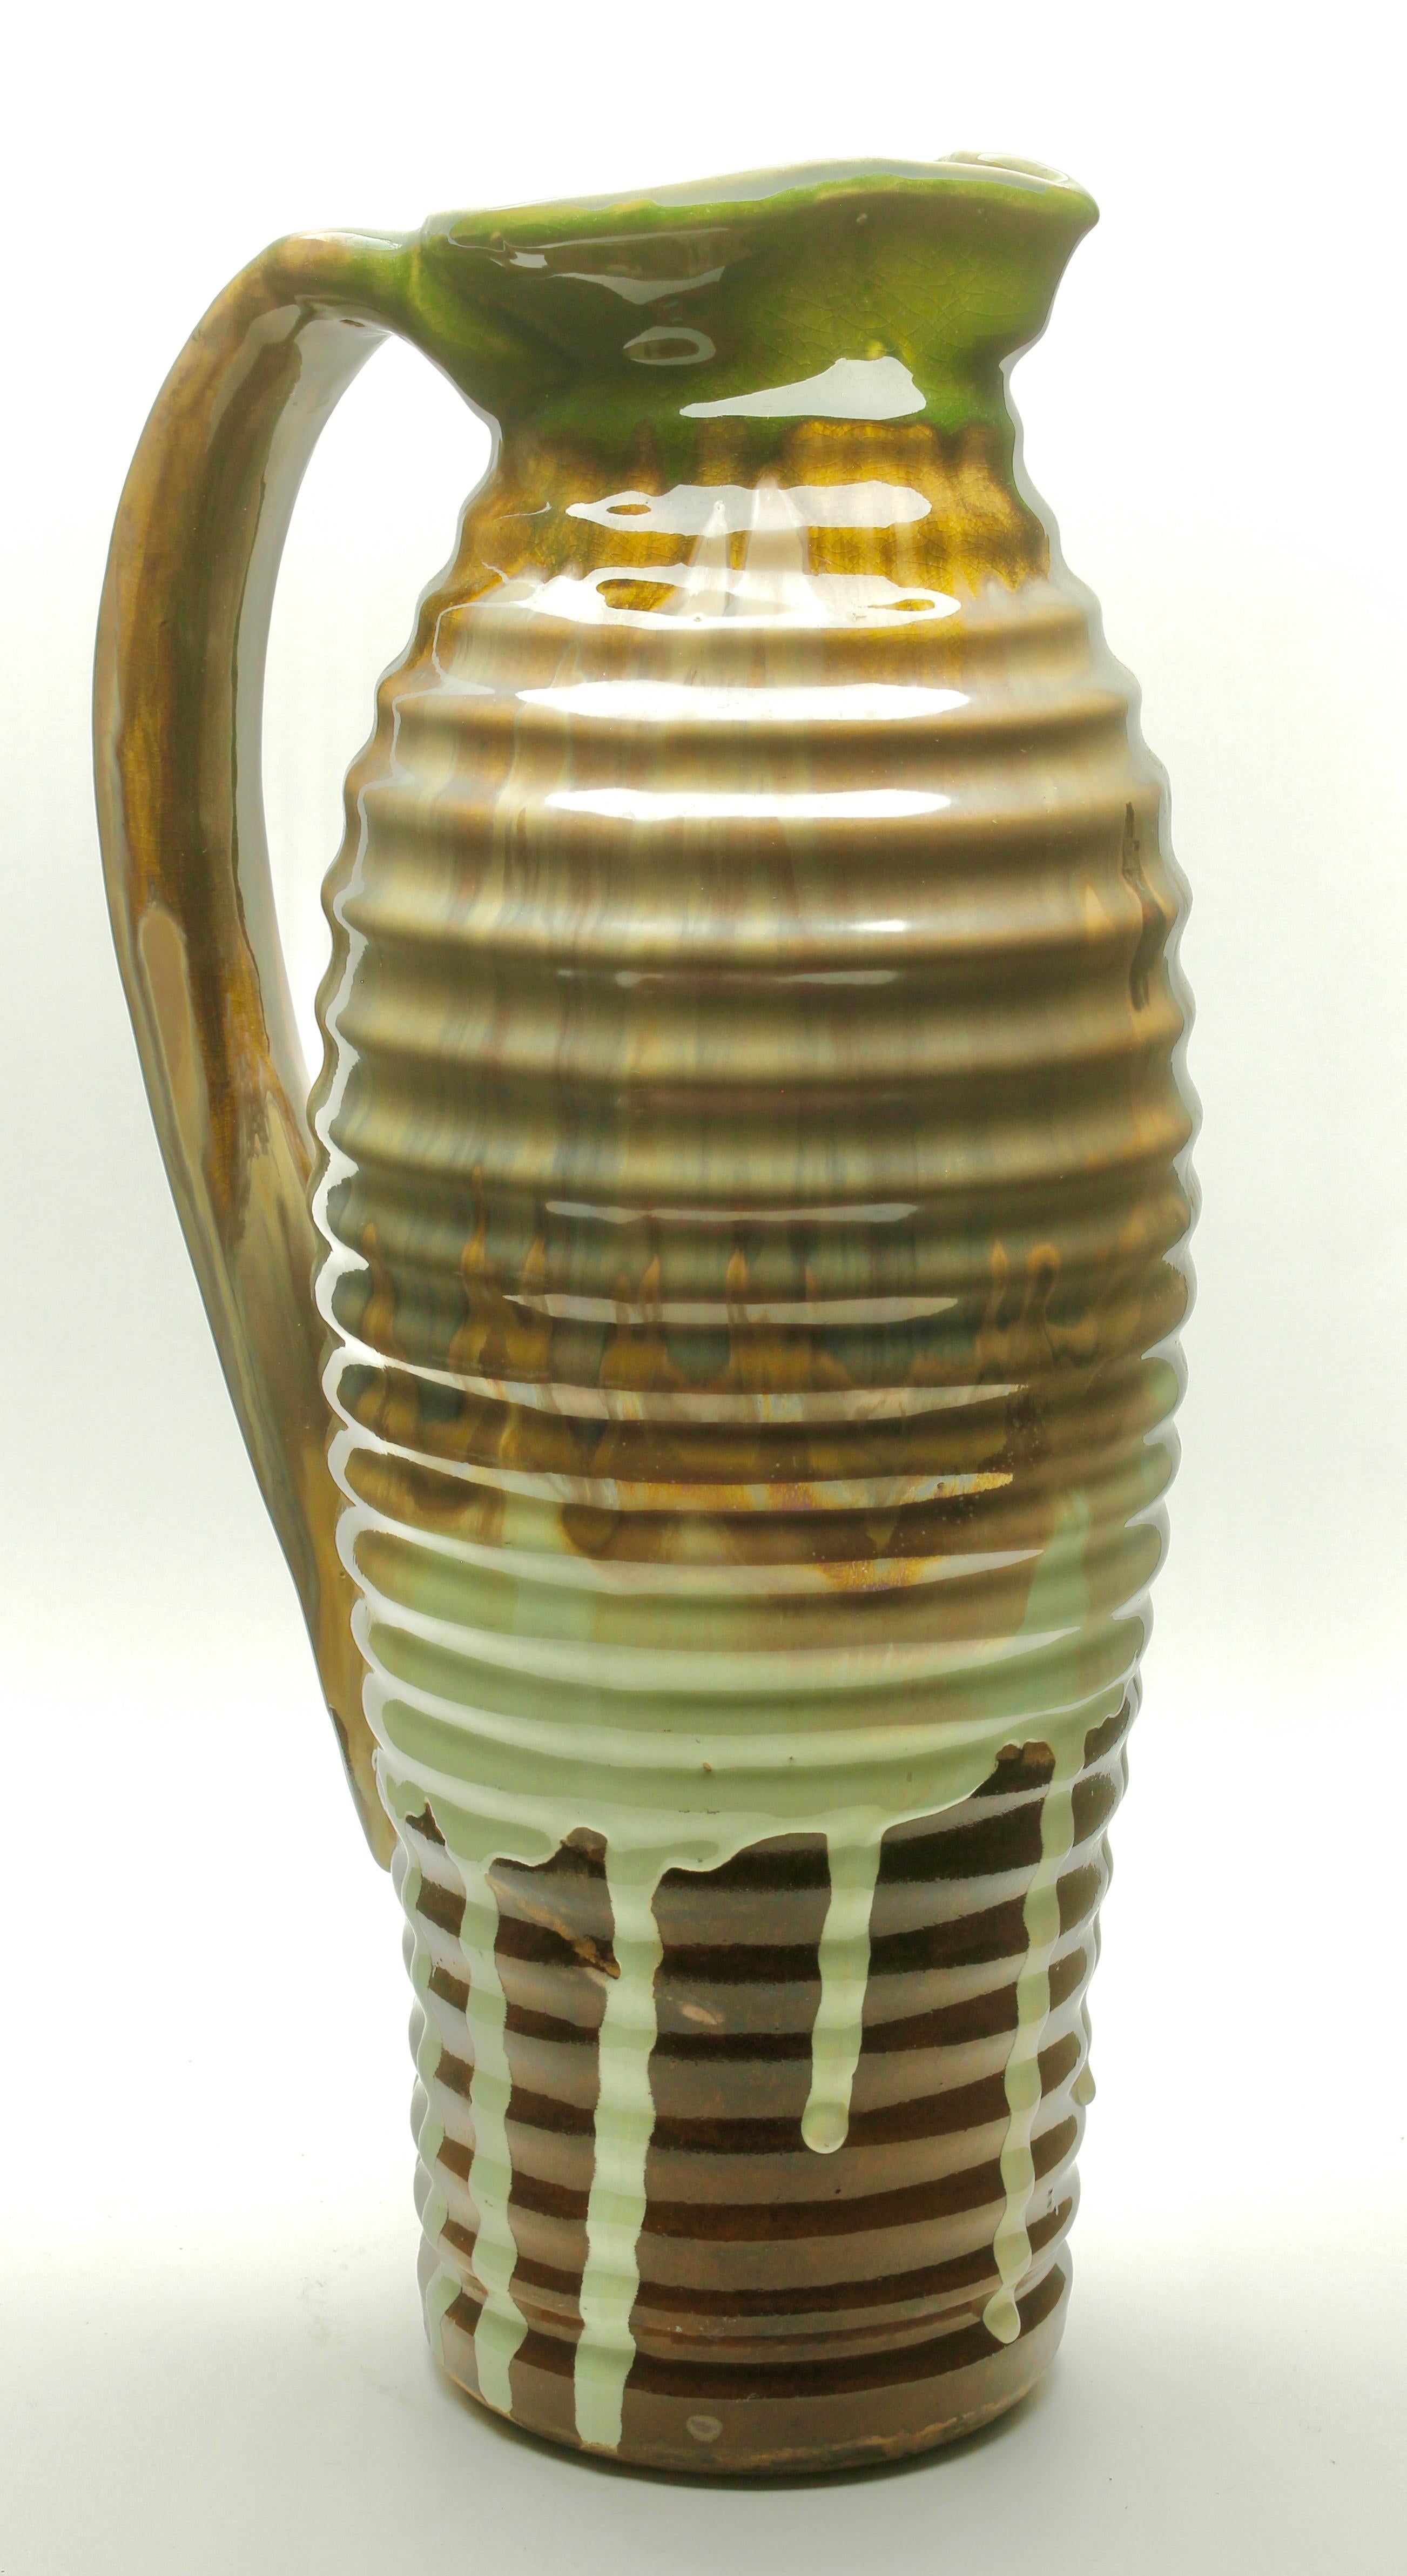 Glazed Ceramic Vase or Pitcher Beautiful Glaze in Shades of Brown and Green, circa 1930 For Sale